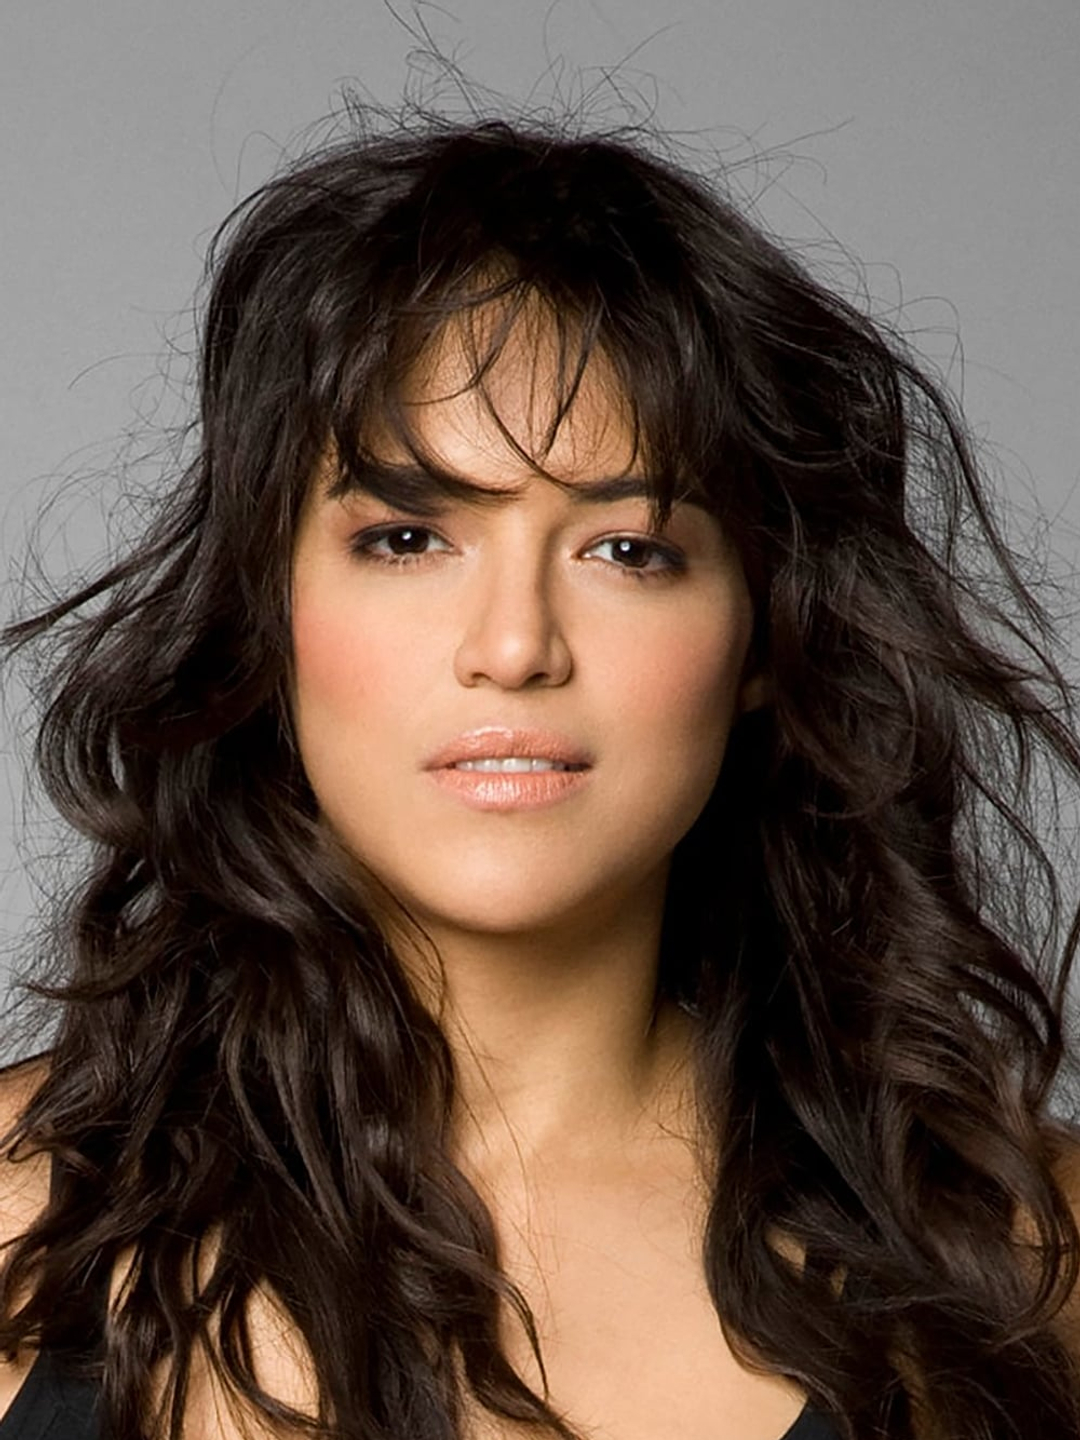 Michelle Rodriguez in her youth